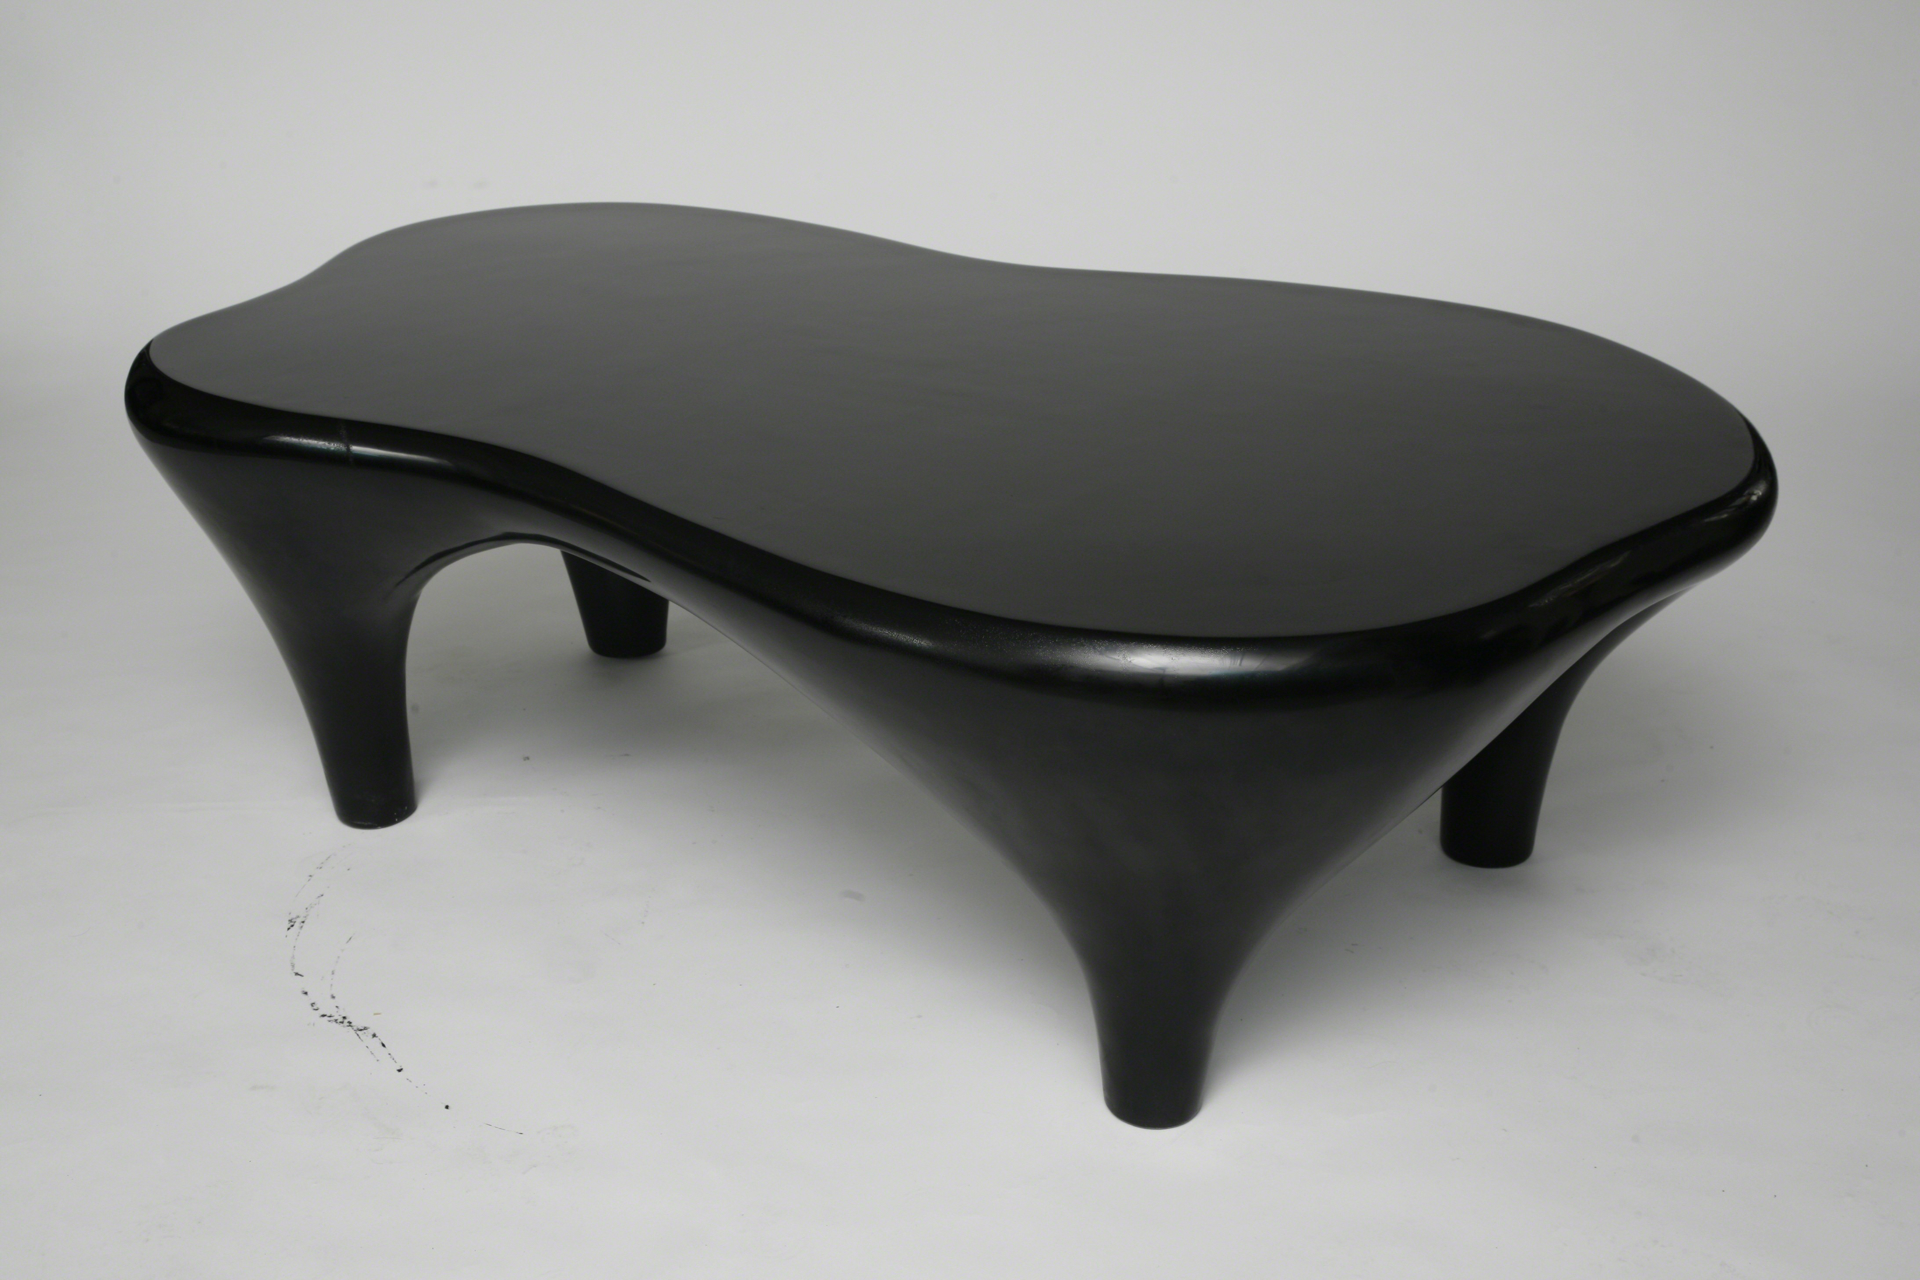 "Toro" Coffee table in black by Jacques Jarrige